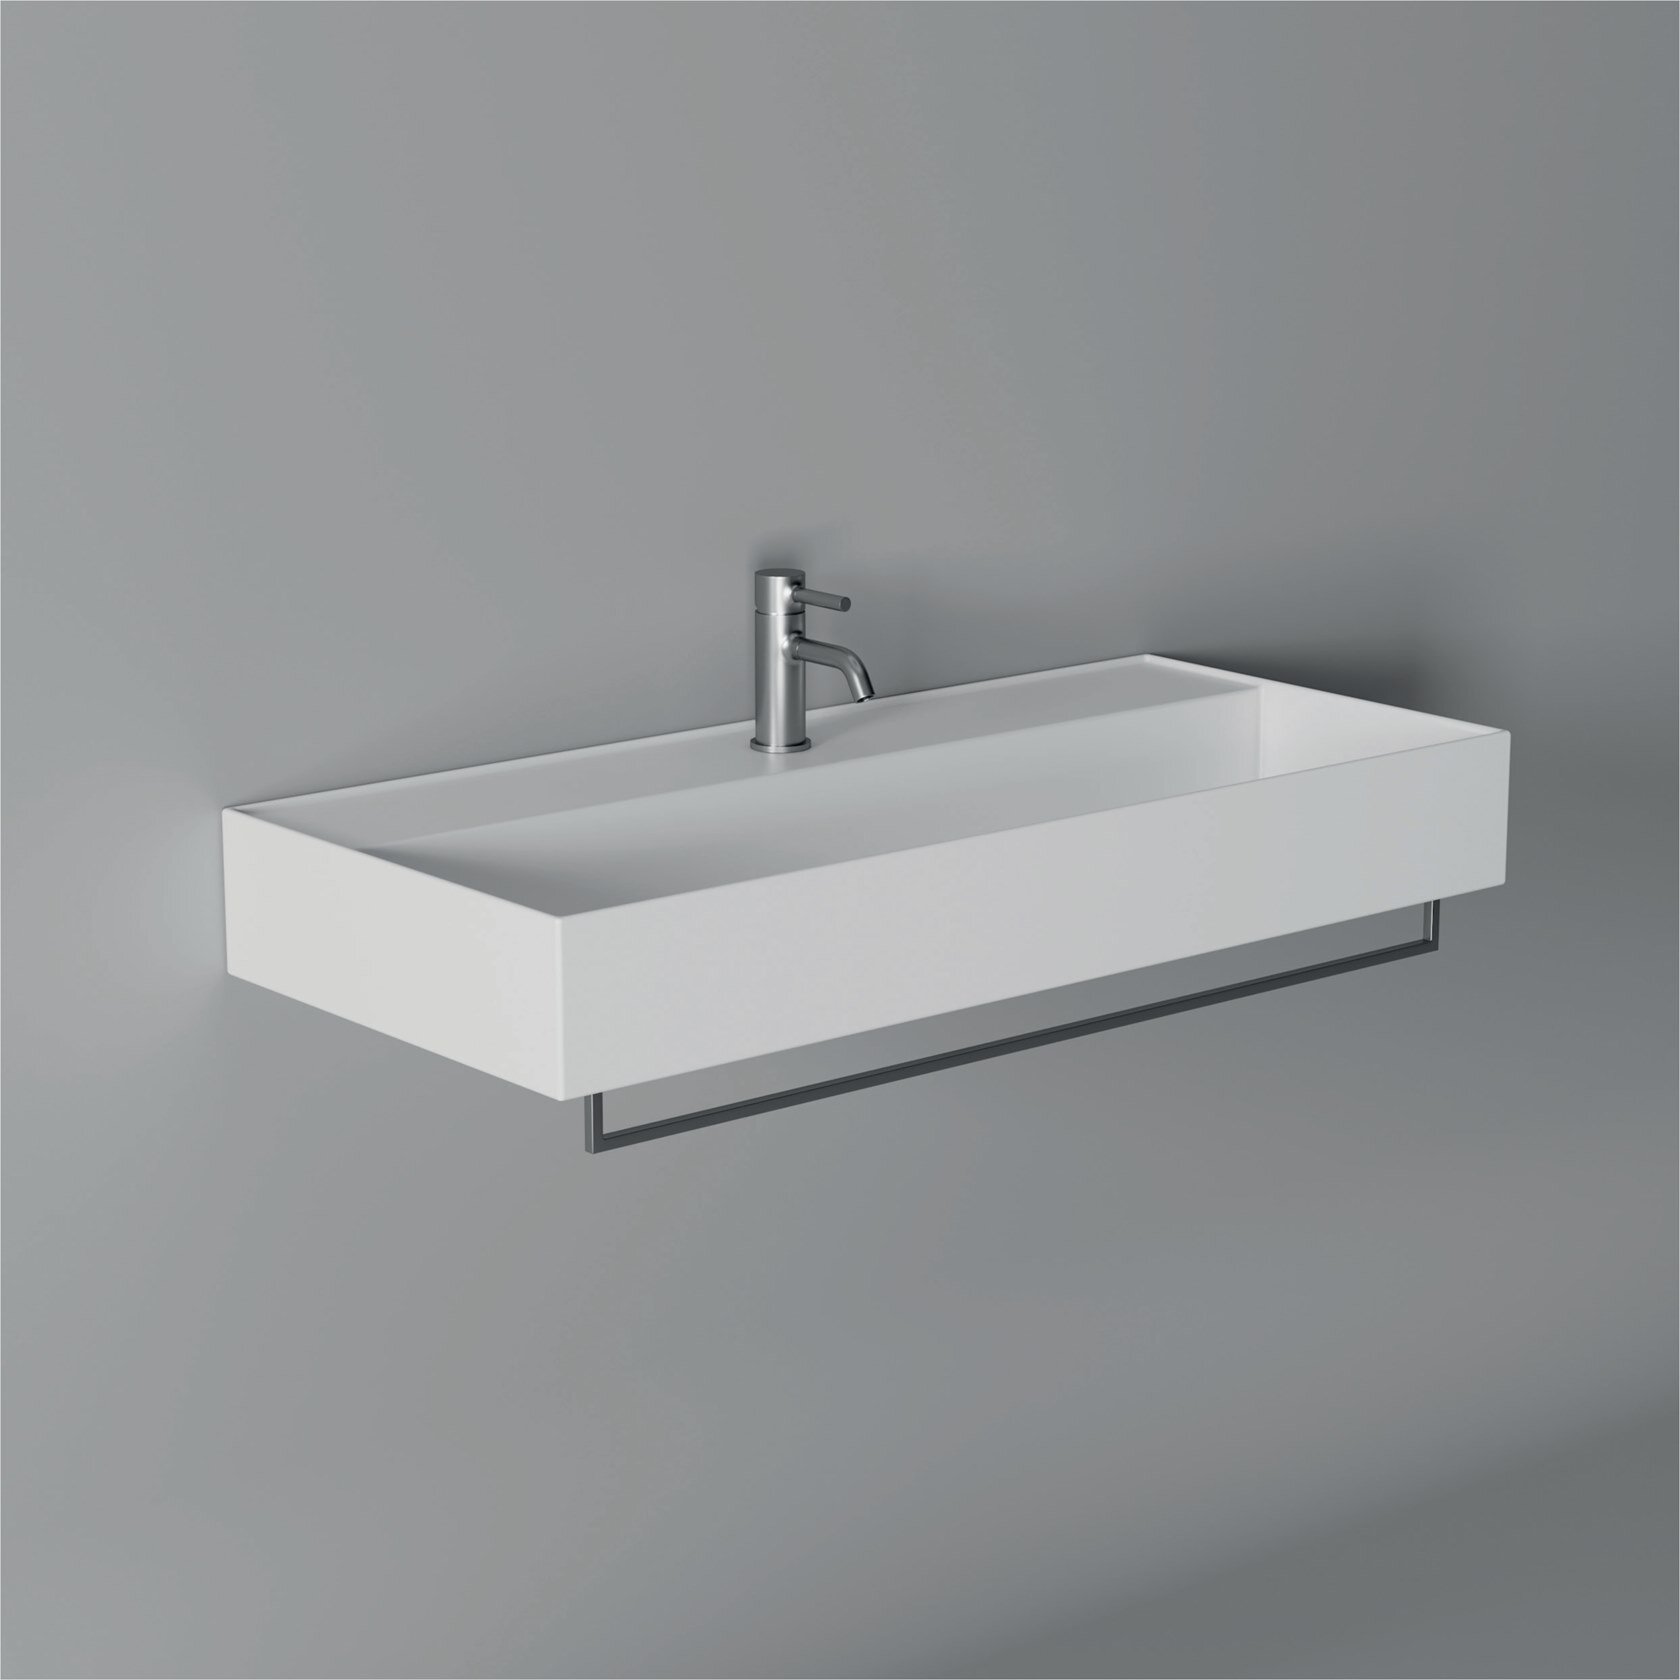 2b_HIDE-Wall-mounted-washbasin-Alice-Ceramica-364911-rel78a85d65.png